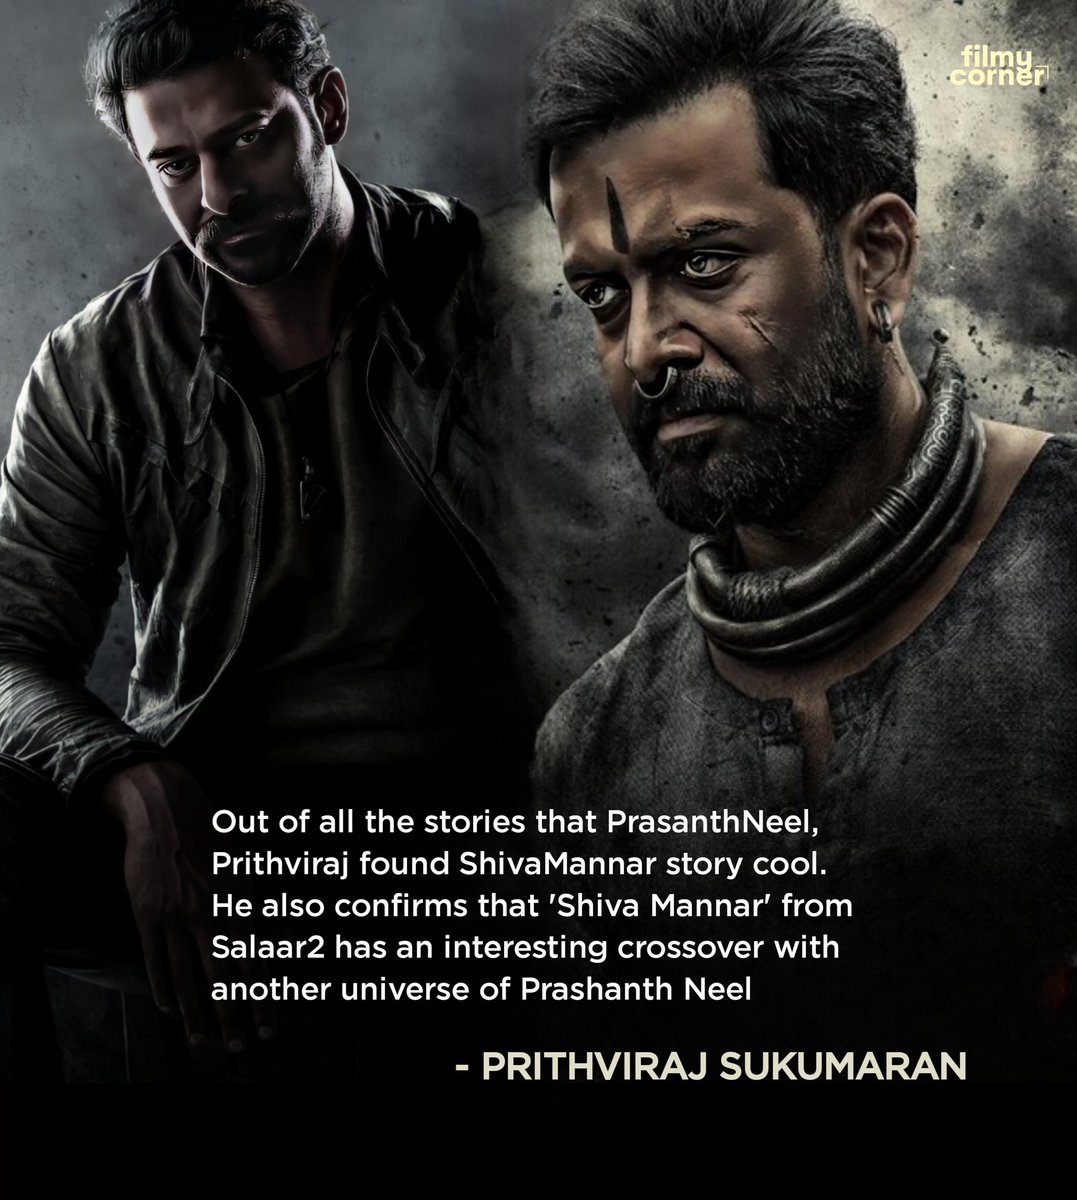 Out of all the stories that #PrasanthNeel, #Prithviraj found #ShivaMannar story cool. He also confirms that 'Shiva Mannar' from #Salaar2 has an interesting crossover with another universe of Prashanth Neel.

#HombaleFilms #Telugu #Prabhas #prithvirajsukumaran